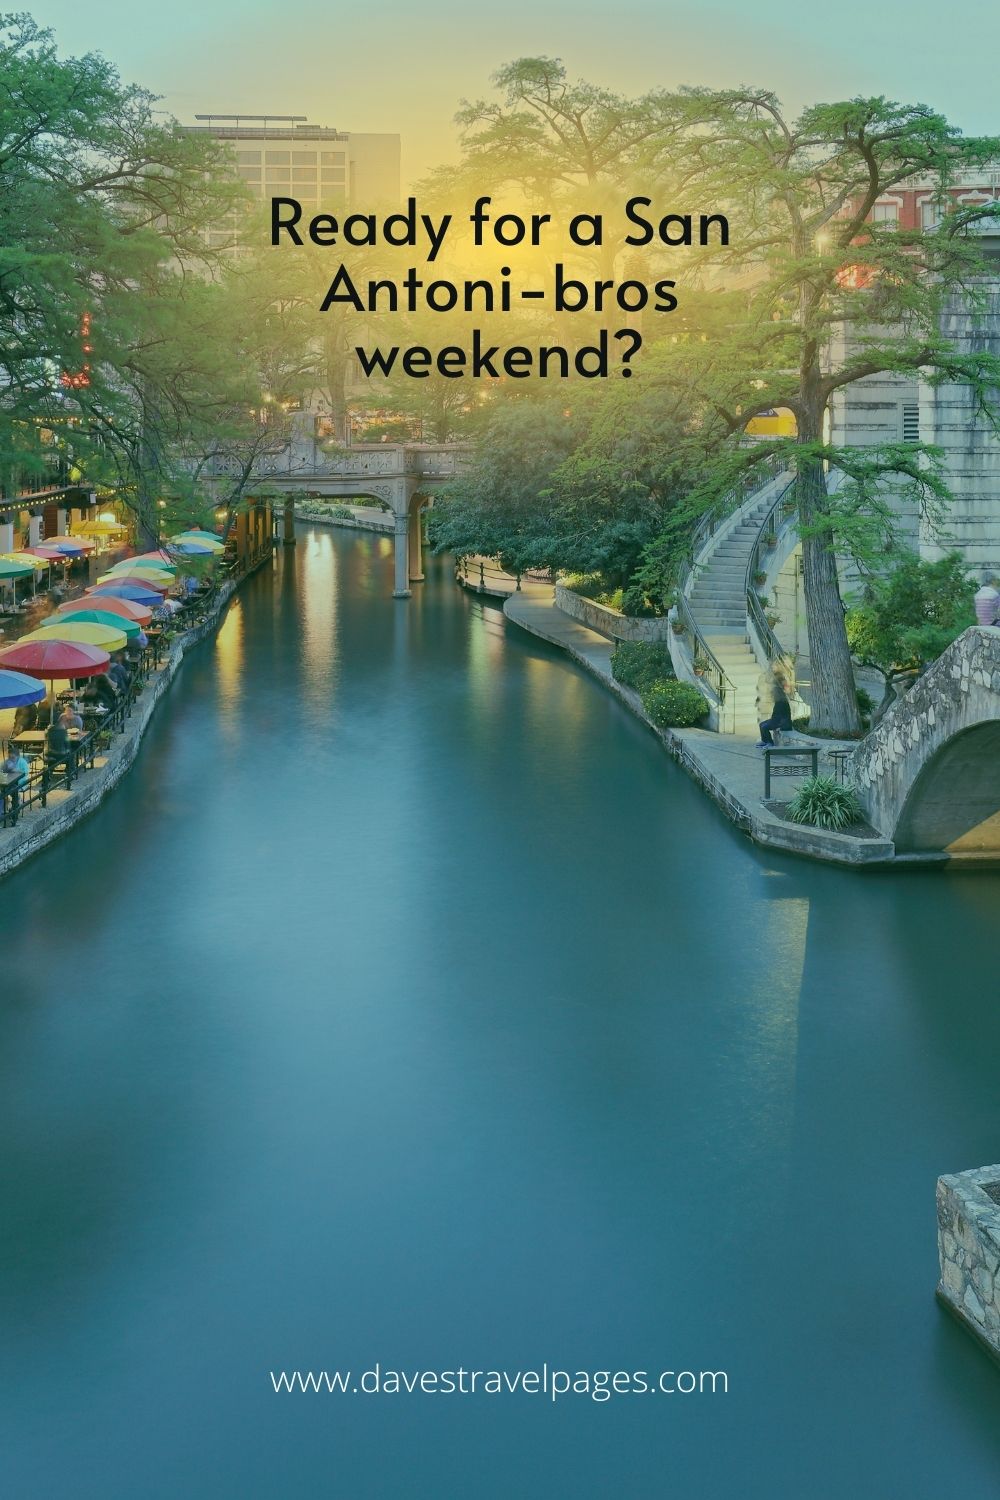 Ready for a San Antoni-bros weekend?